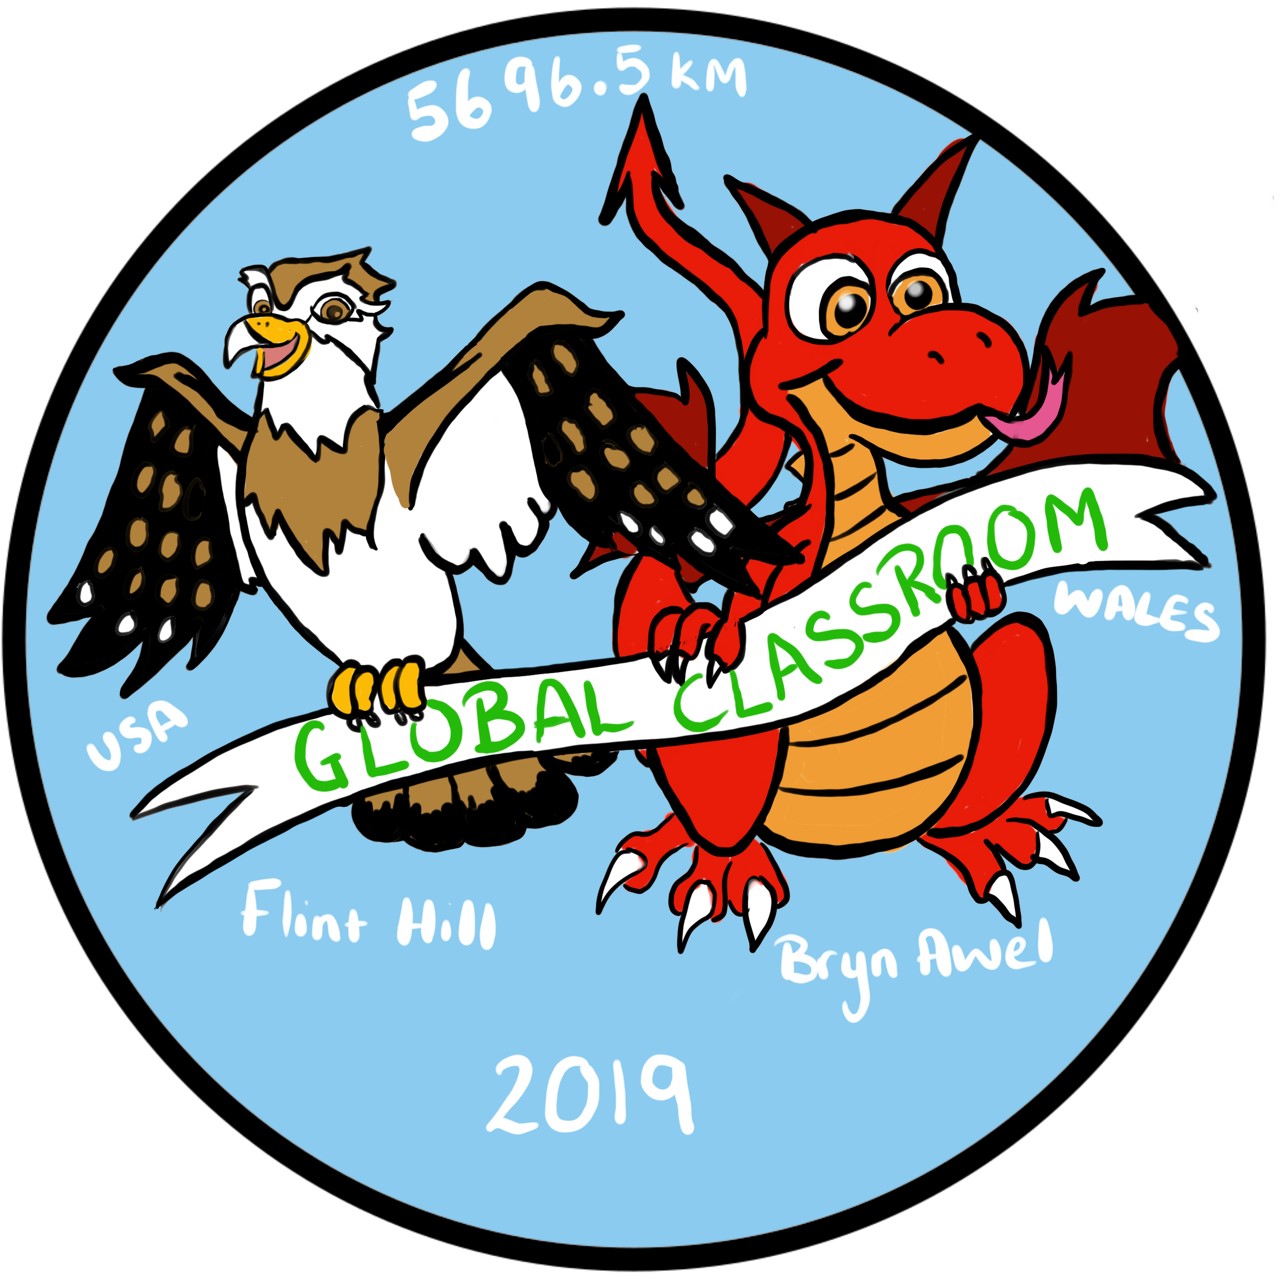 Badge created by Bryn Awel Primary School for Global Classroom Project